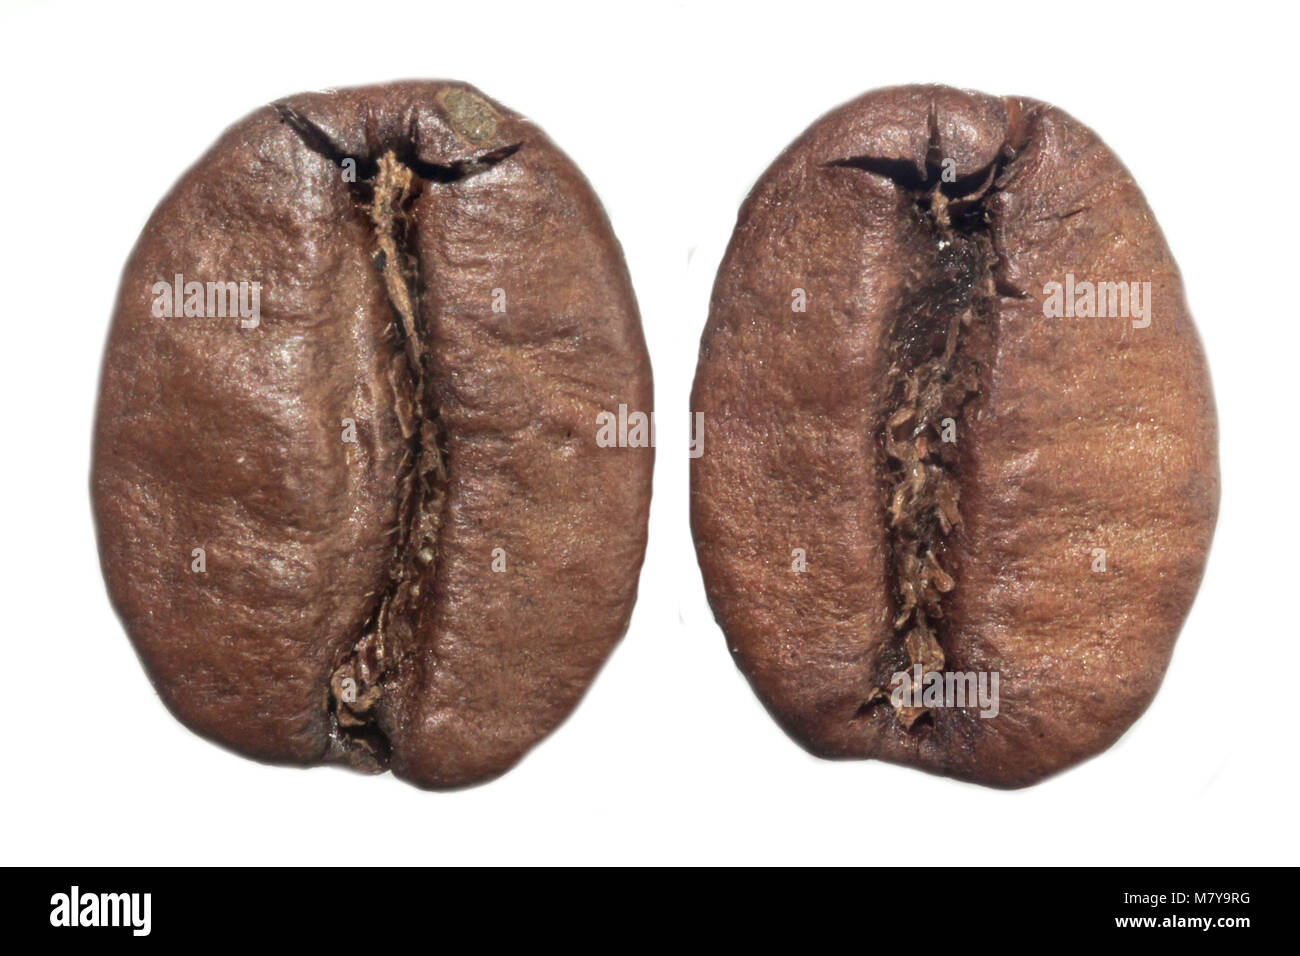 Macro photo of two roasted coffee beans. Furrow in the middle. On a white background. Photo for the site about food, drinks, health, business. Stock Photo